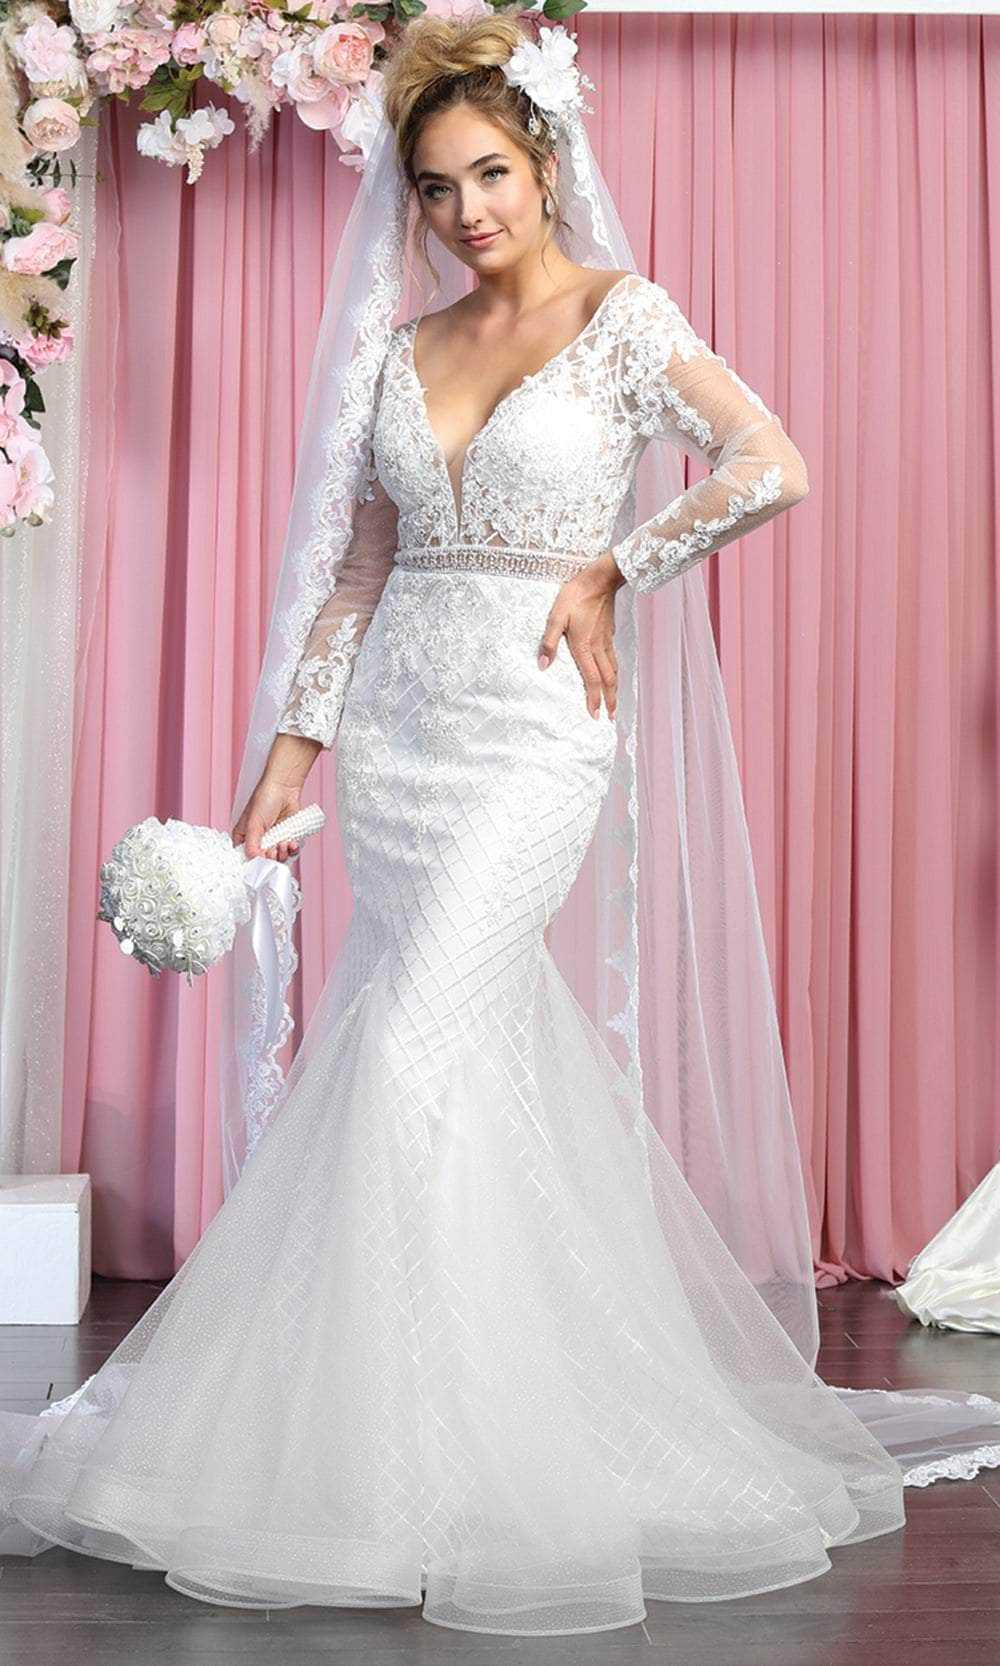 May Queen, May Queen RQ7896 - Long Sleeves Sheer V-neck Wedding Gown